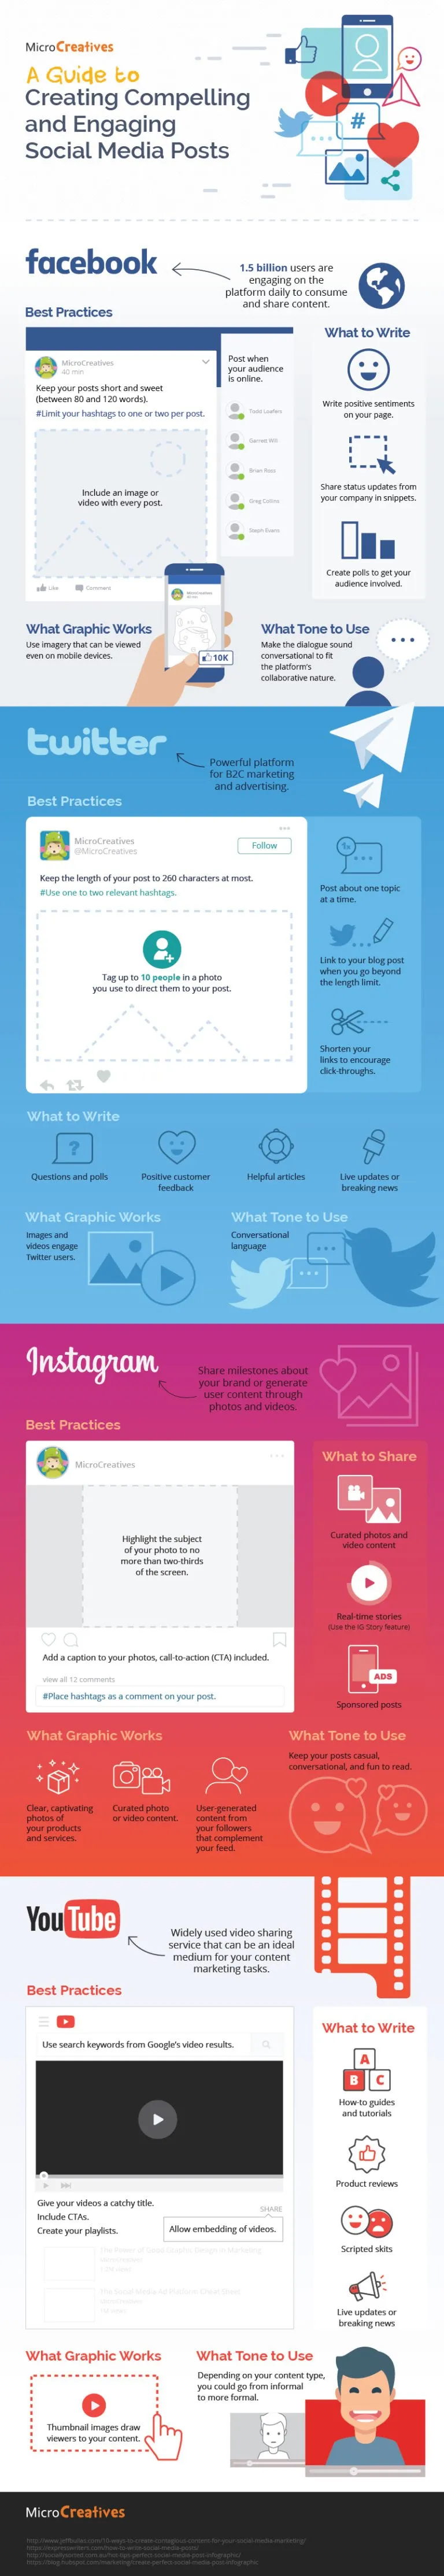 A Guide To Creating Compelling And Engaging Social Media Posts - #infographic